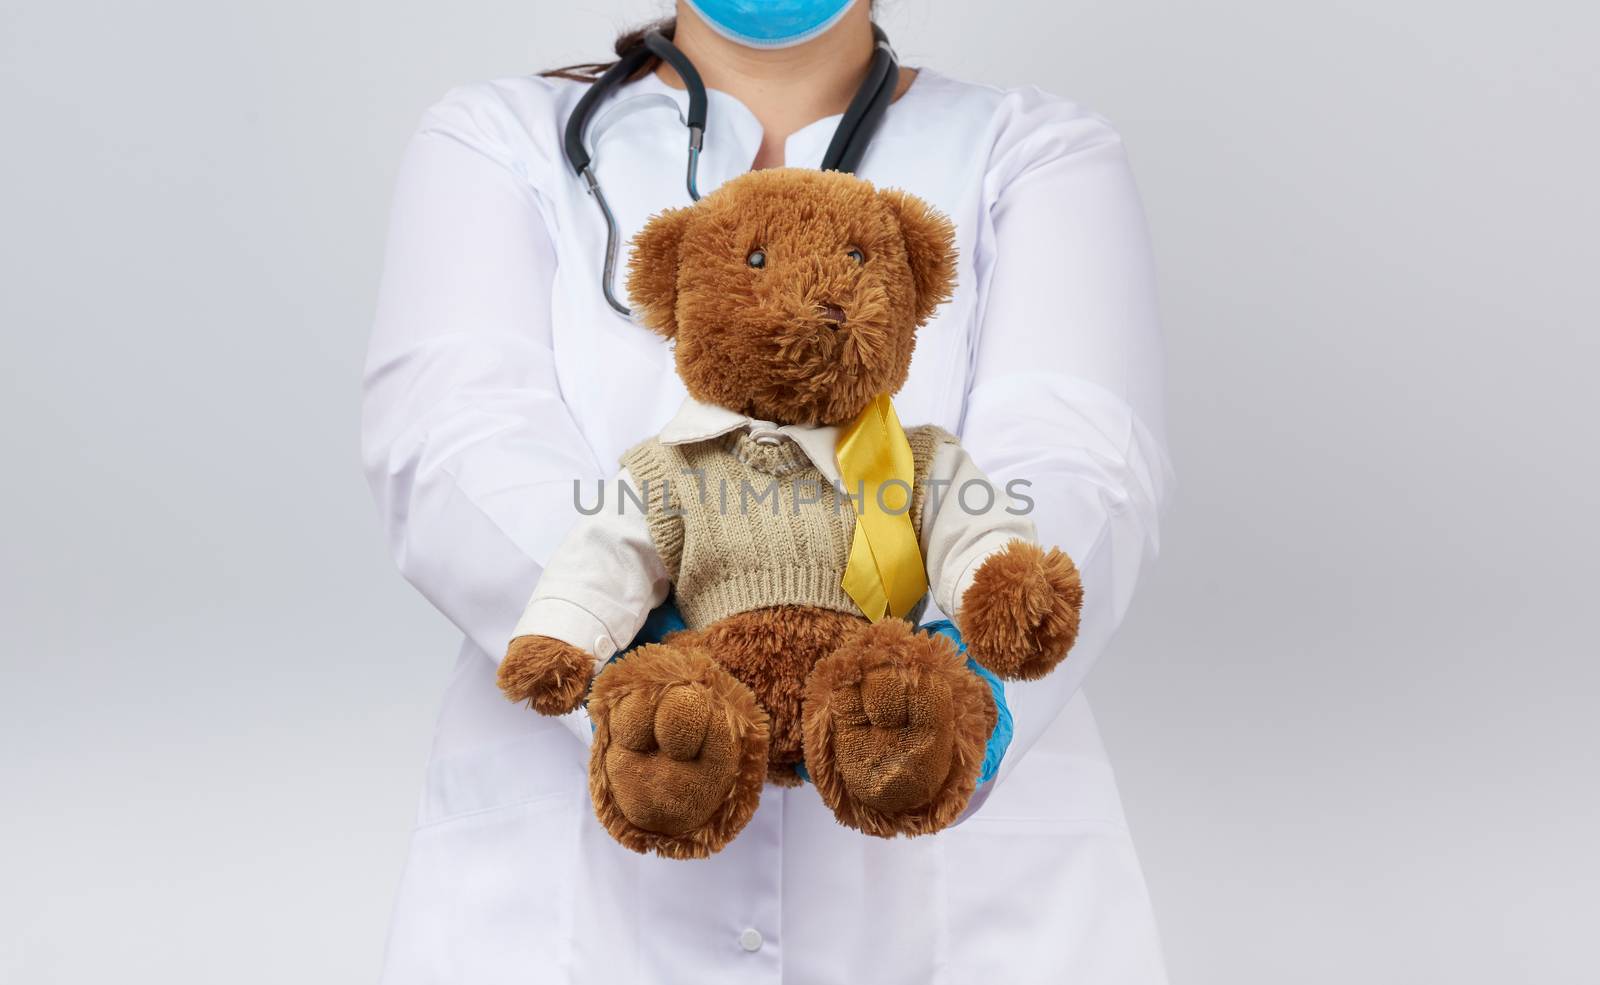 pediatrician in white coat, blue latex gloves holds a brown teddy bear with a yellow ribbon on a sweater, concept of the fight against childhood cancer, problem of suicides